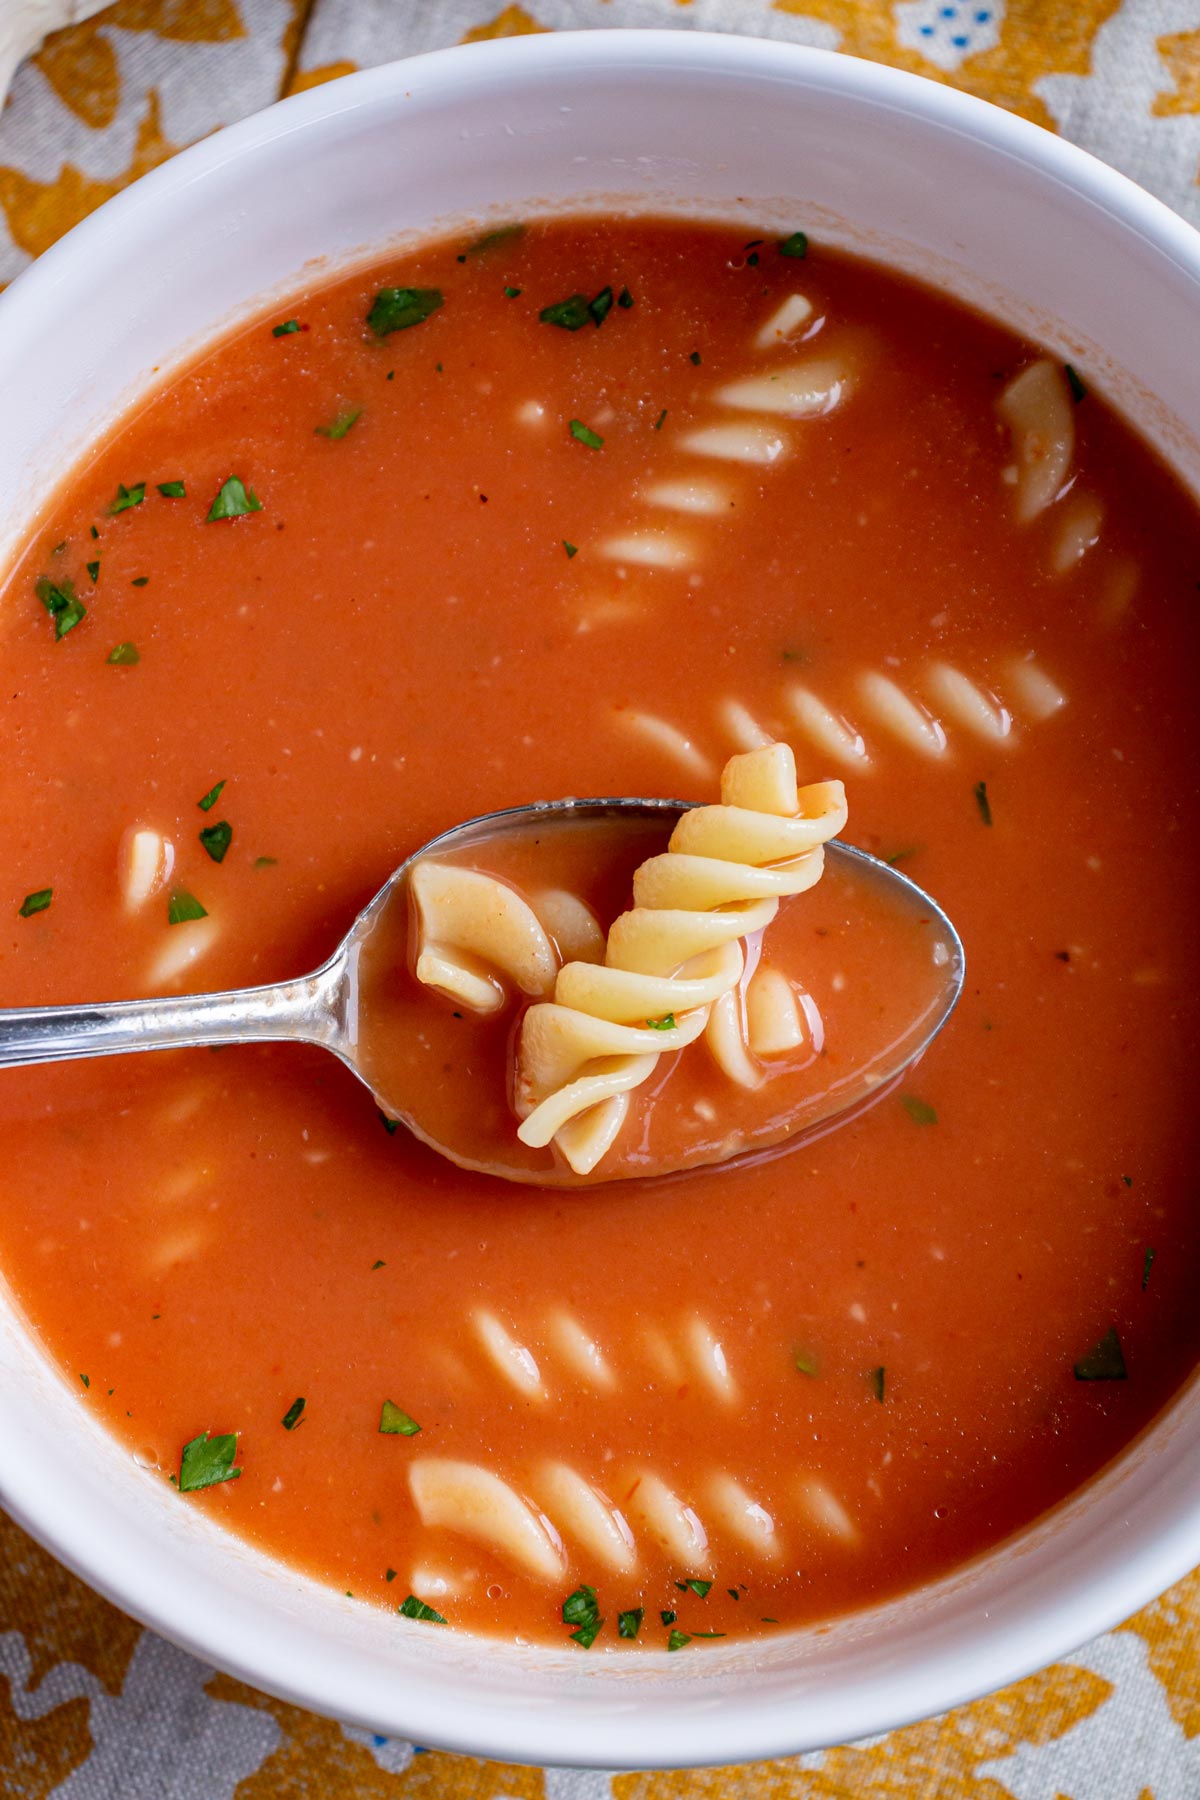 A spoon scooping up a couple rotini pastas out of a bowl of Polish tomato soup.